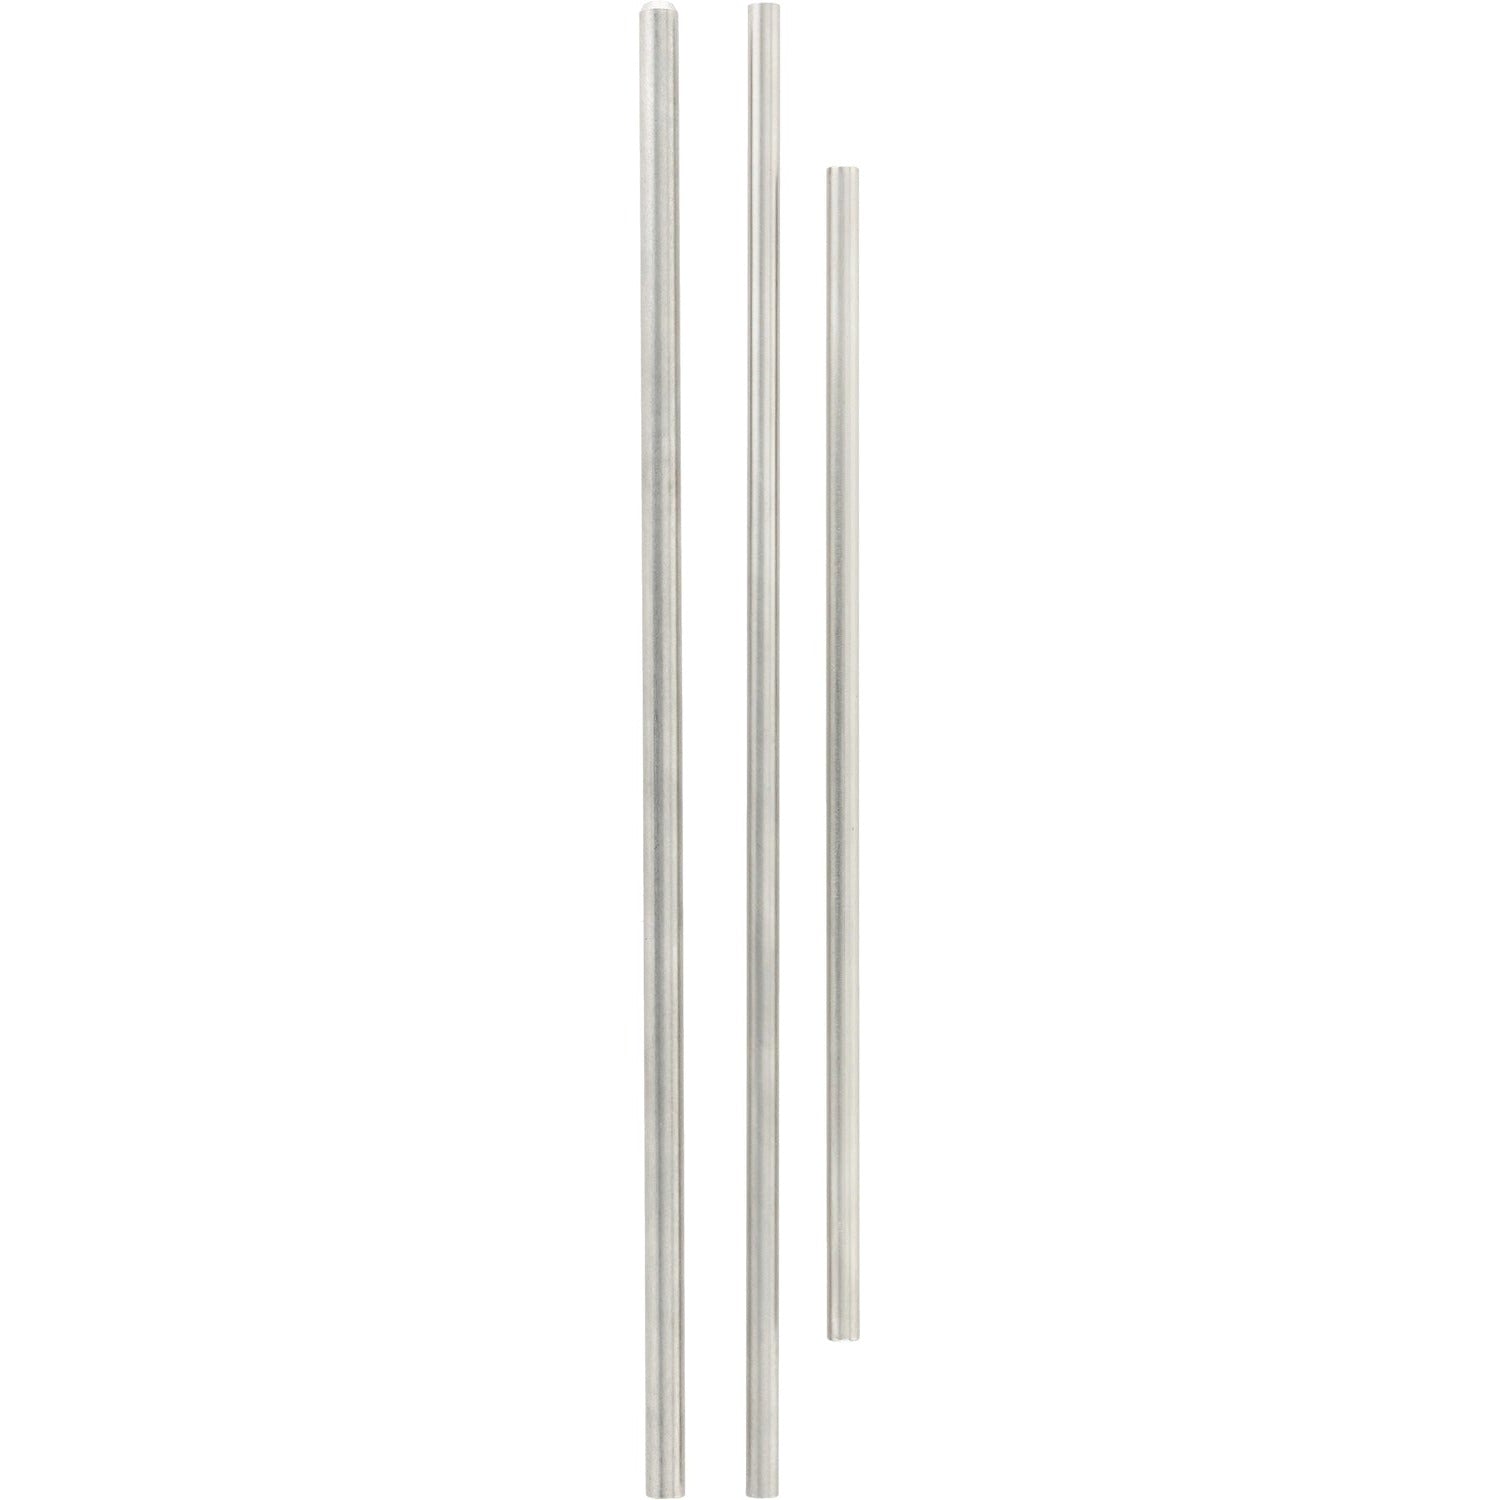 An assortment of three differently sized stainless steel tubes on white background. 